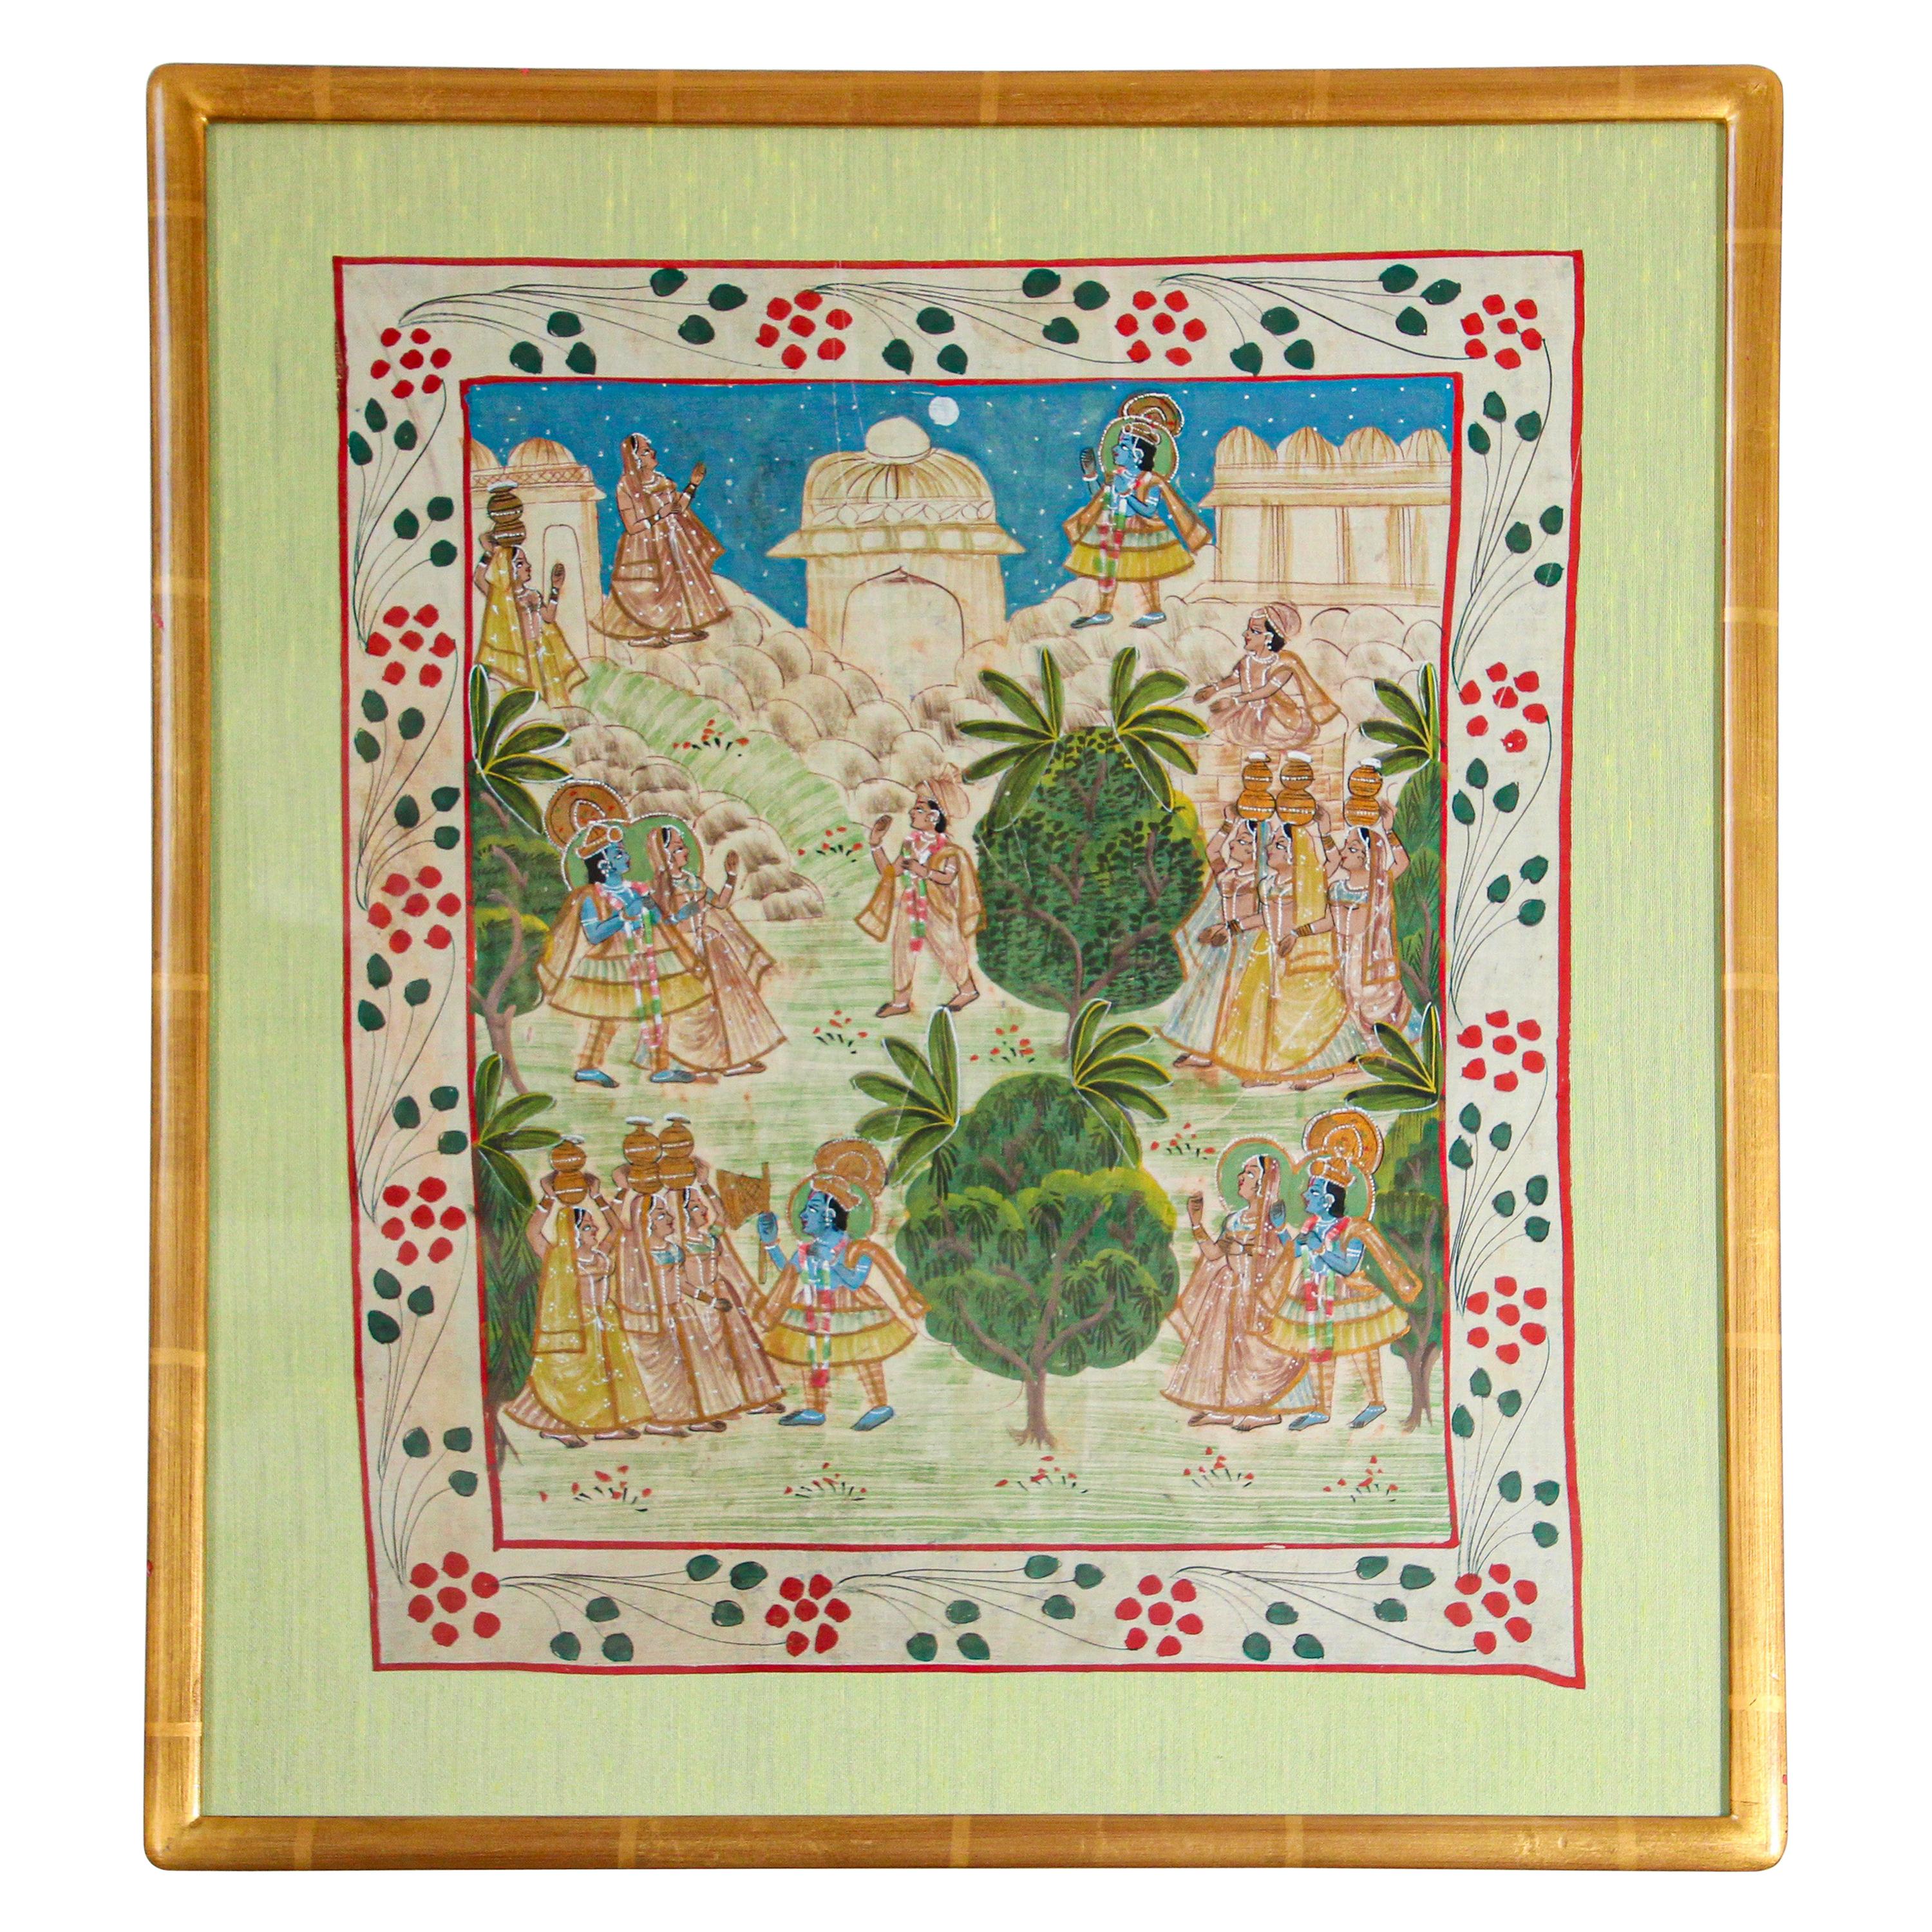 Krishna, Radha, and the Gopis Meet a Young Prince, Picchawai Painting